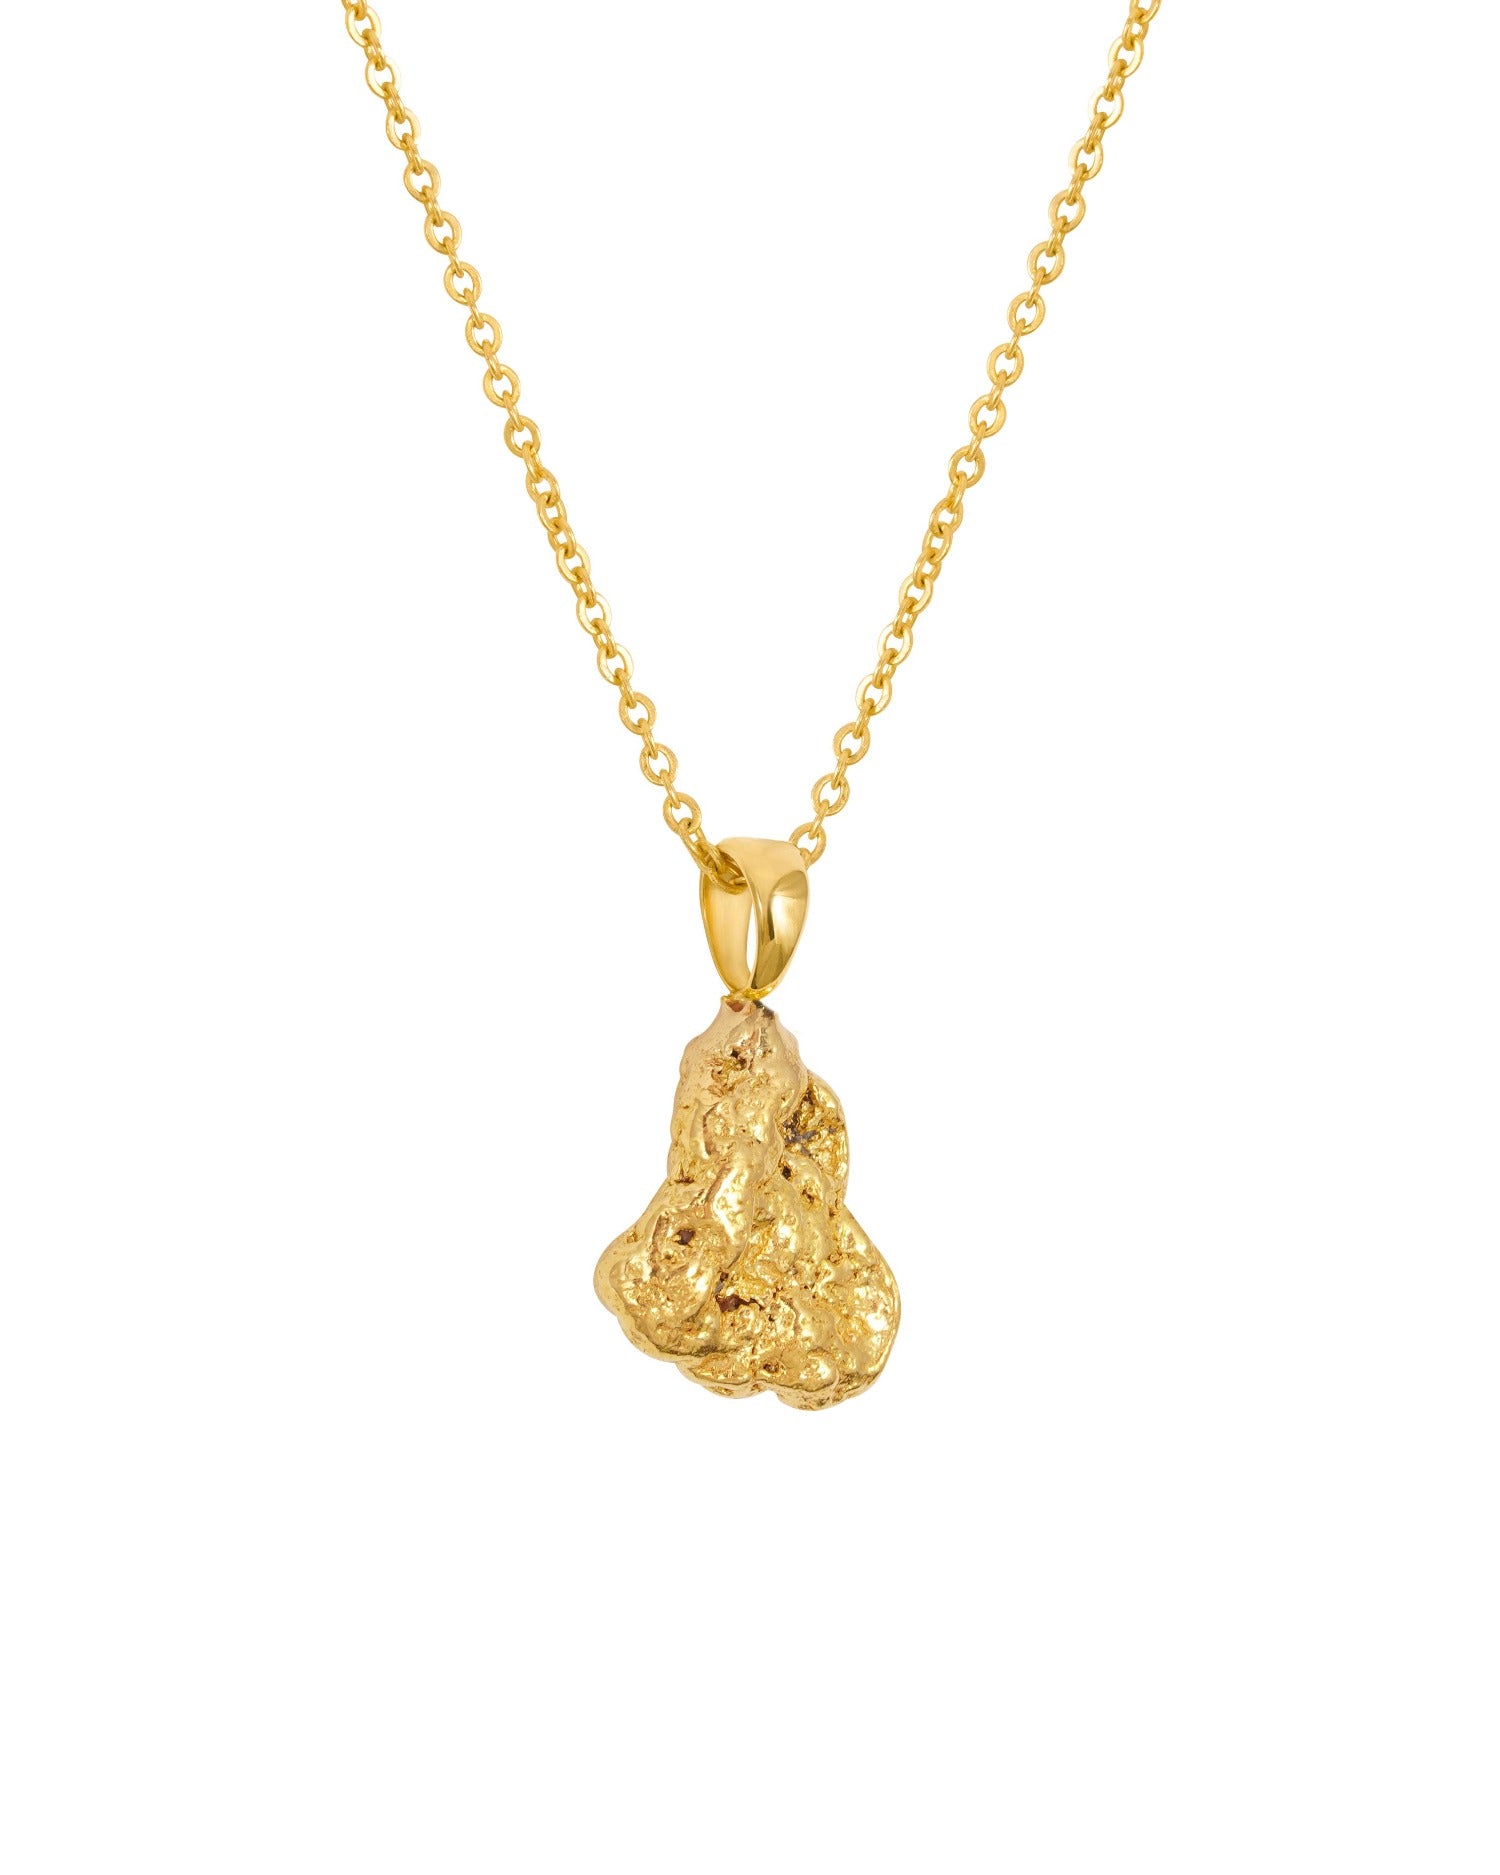 24ct gold nugget charm necklace 3.6